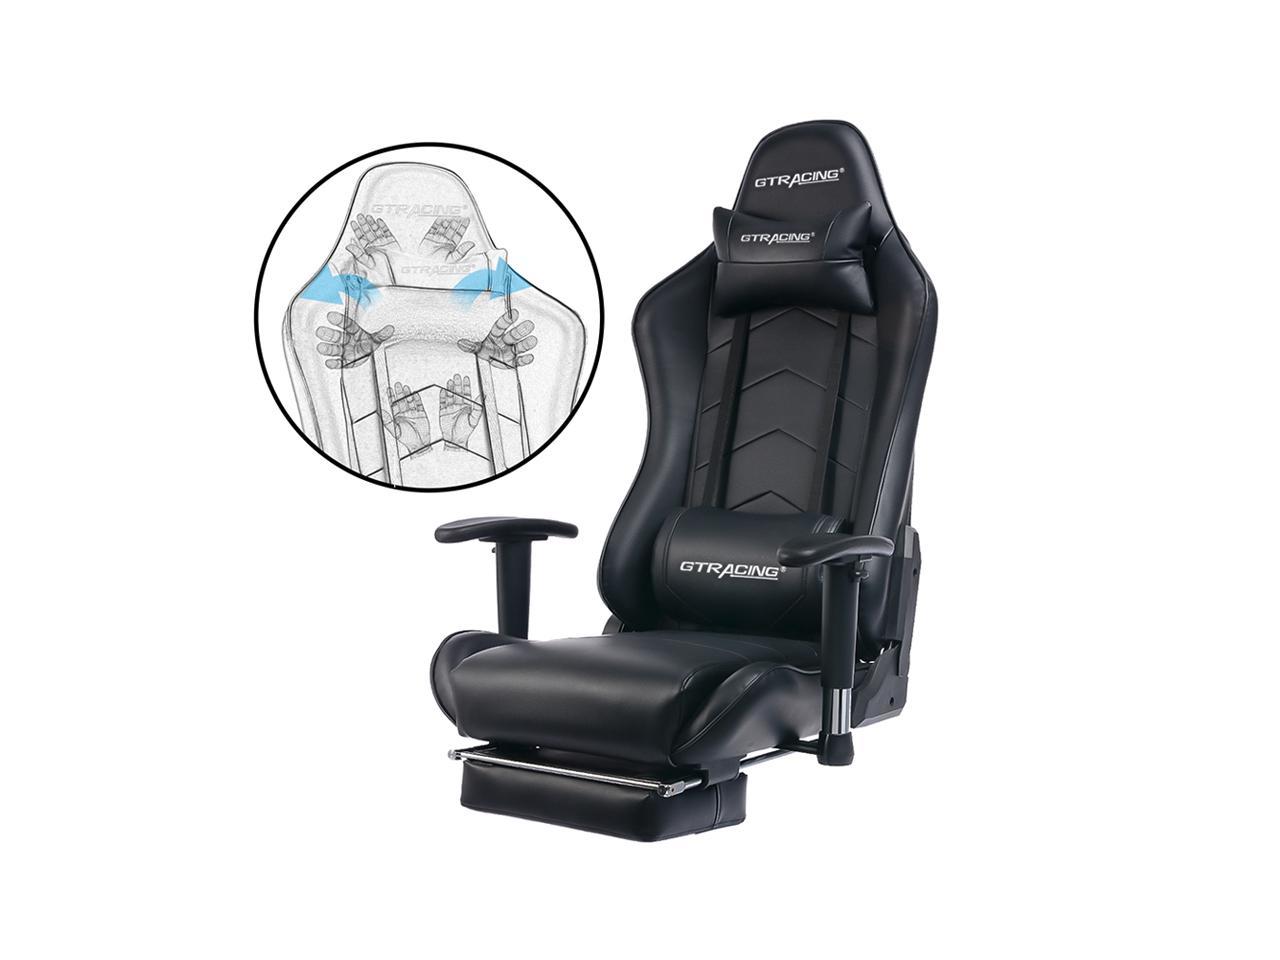 New Gtracing Gaming Chair With Footrest with Simple Decor